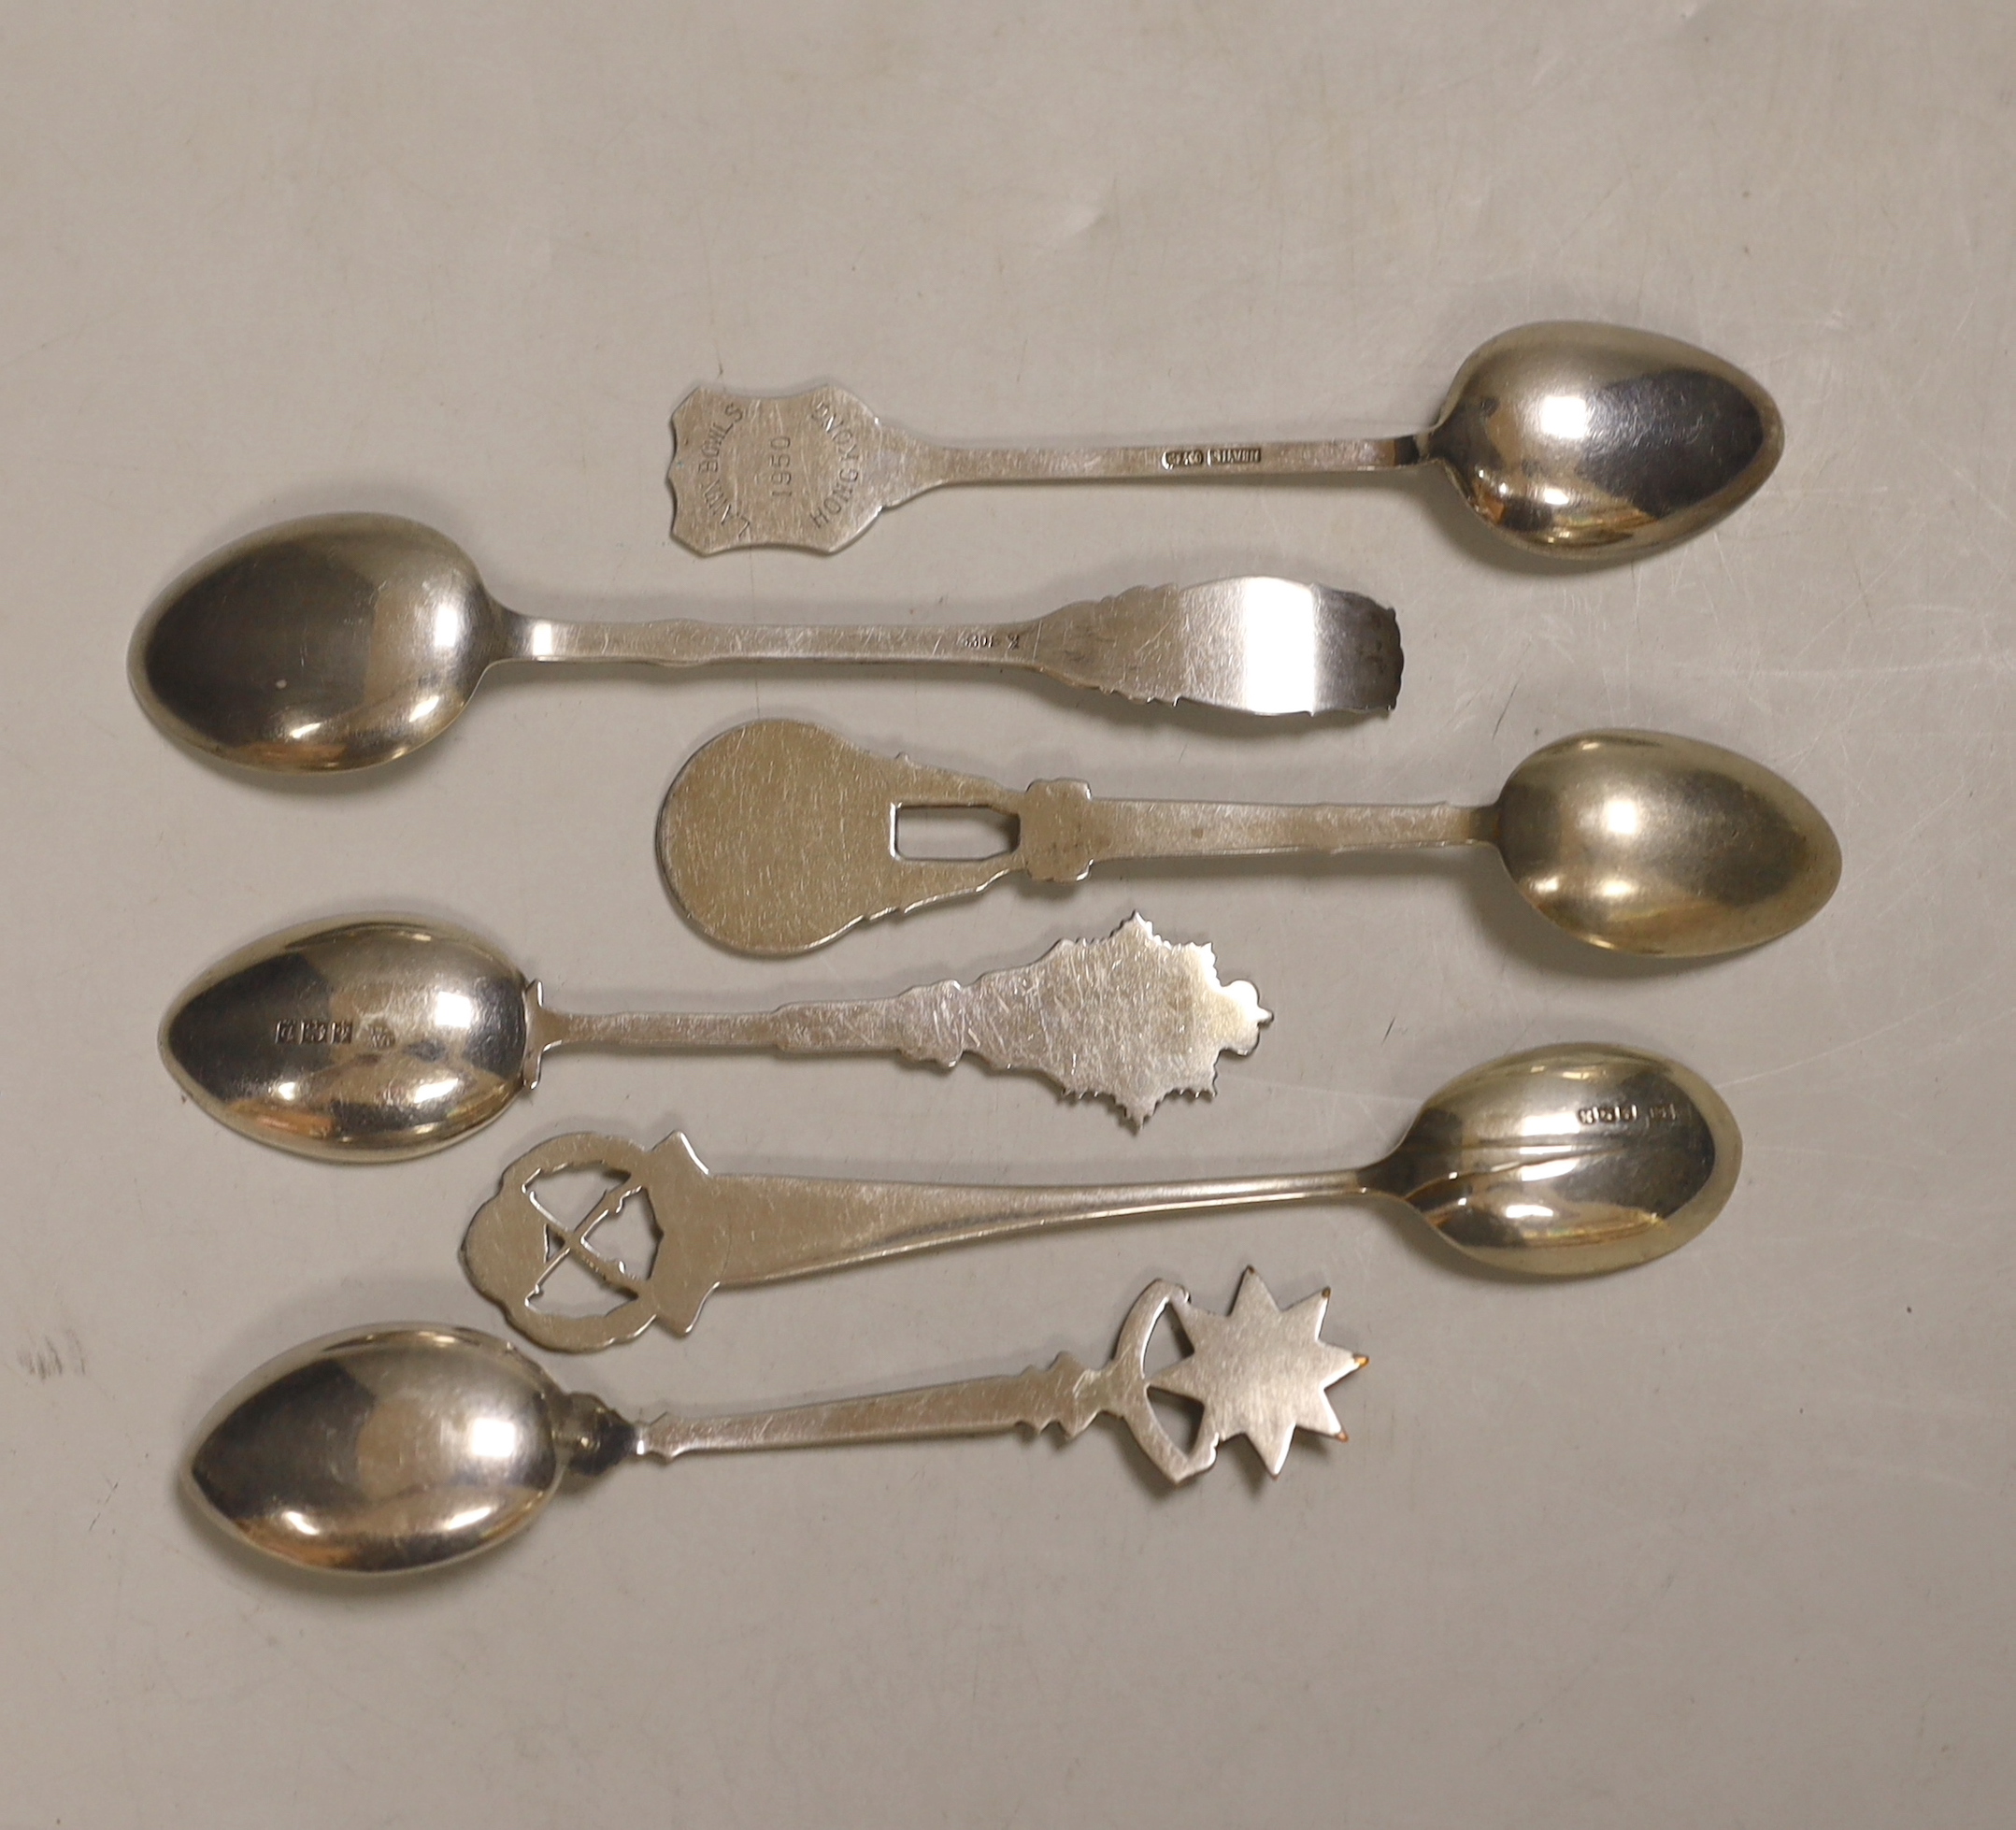 A Roald Amundsen commemorative .830 silver spoon, circa 1911, and five other commemorative spoons, of which four are silver including; Royal Military College, Small Arms School, Royal Army Service Corps, The Kensingtons